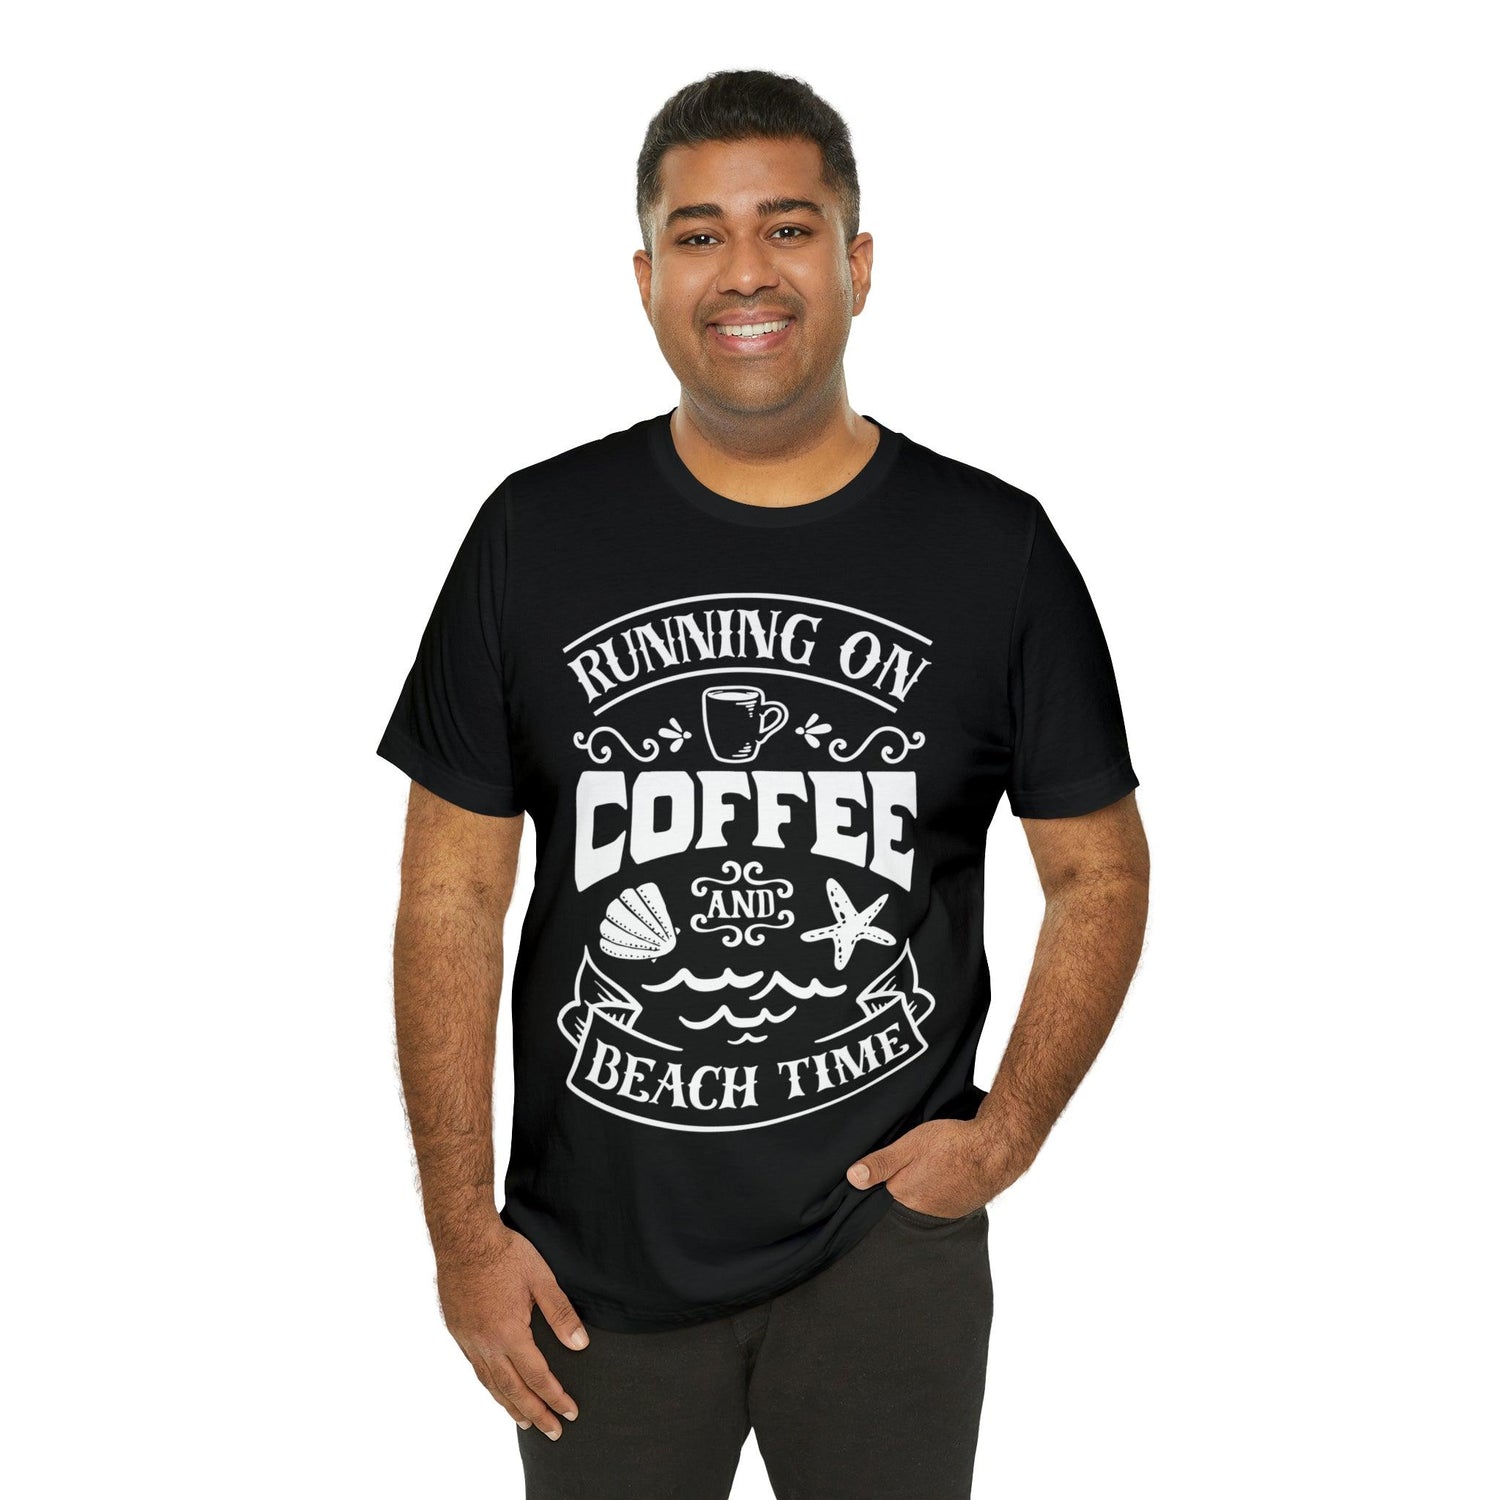 Running On Coffee And Beach Time Unisex Jersey Short Sleeve Tee